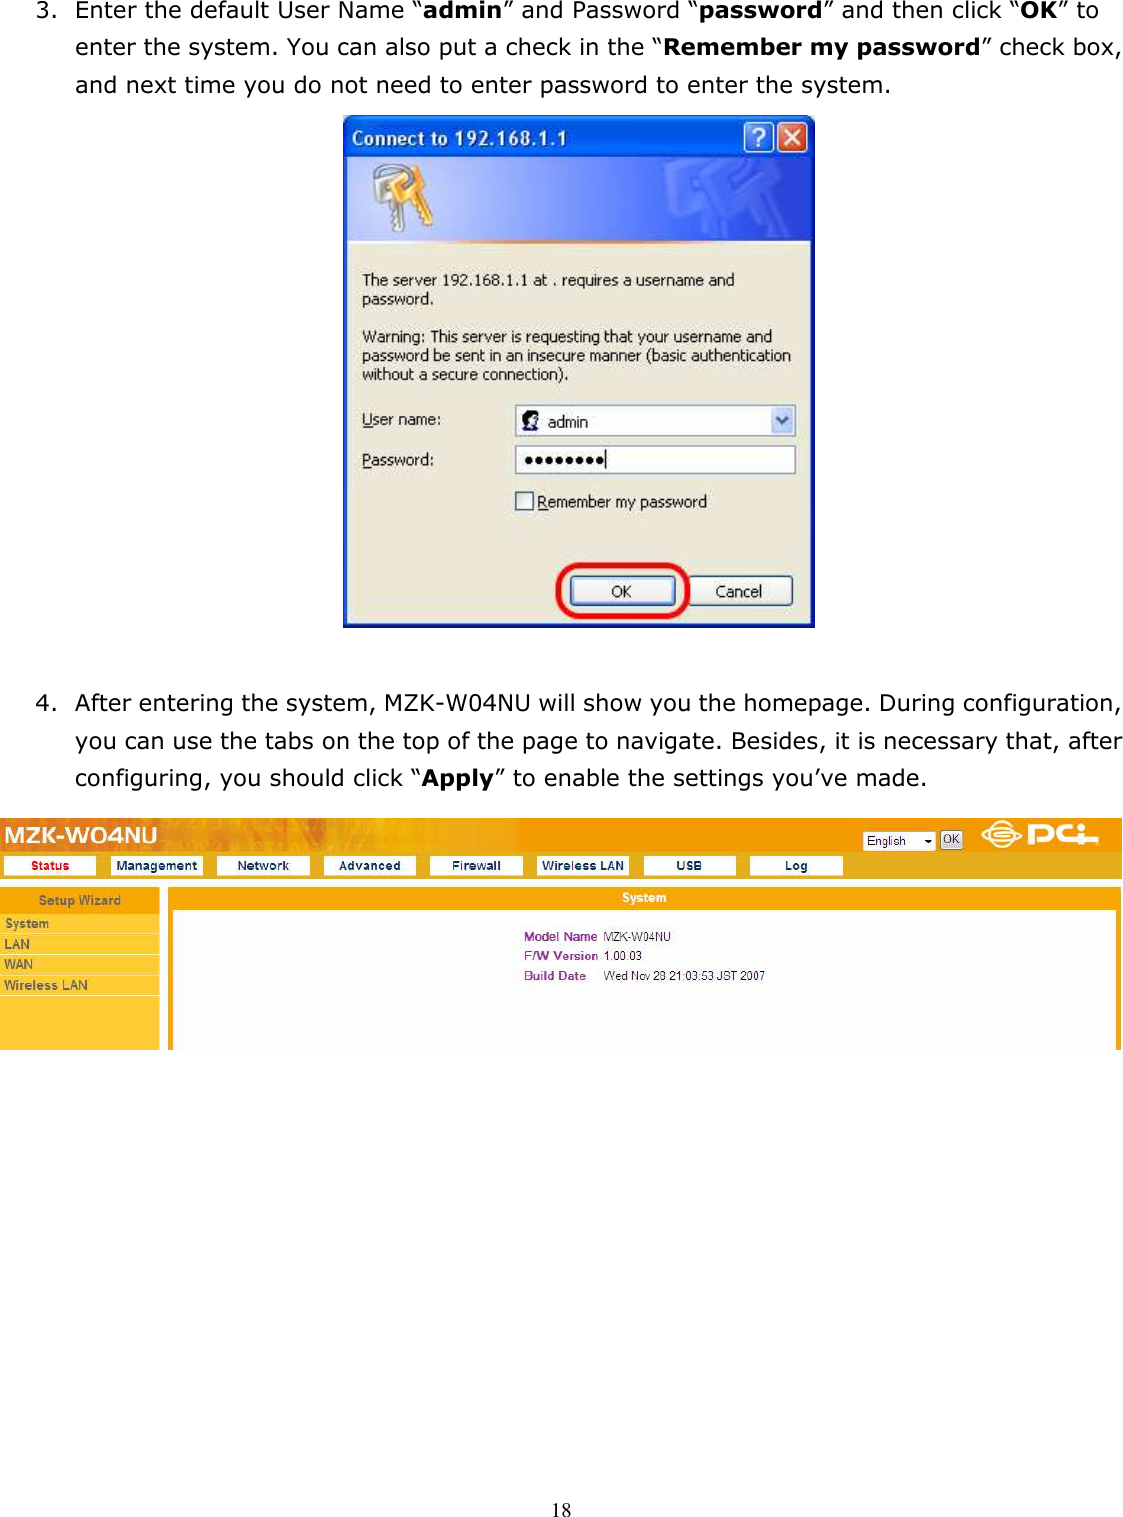   183. Enter the default User Name “admin” and Password “password” and then click “OK” to enter the system. You can also put a check in the “Remember my password” check box, and next time you do not need to enter password to enter the system.   4. After entering the system, MZK-W04NU will show you the homepage. During configuration, you can use the tabs on the top of the page to navigate. Besides, it is necessary that, after configuring, you should click “Apply” to enable the settings you’ve made.             